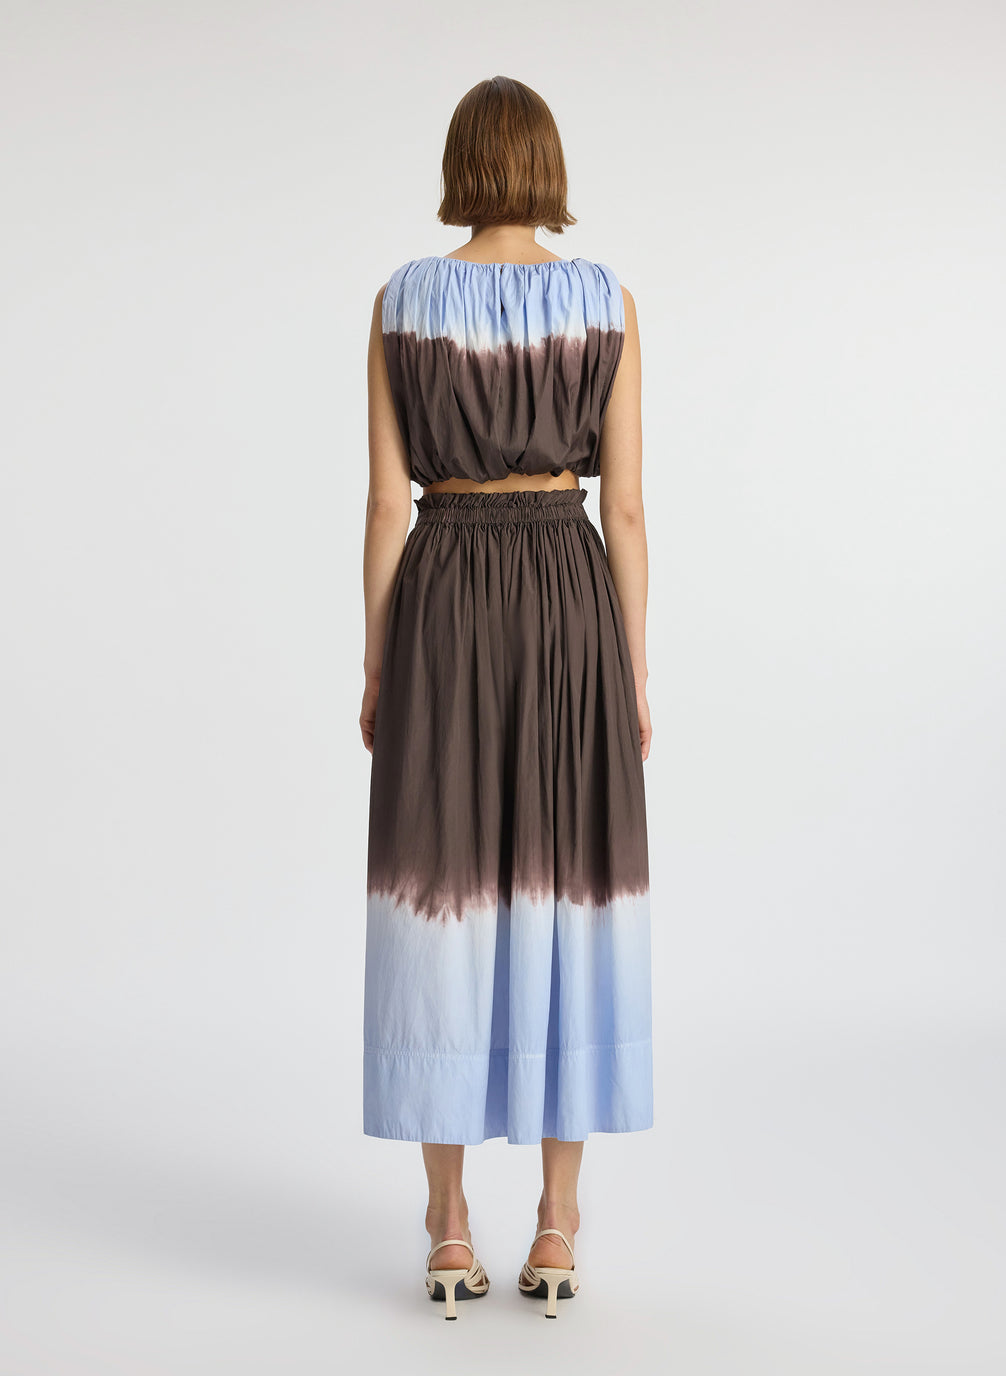 back view of woman wearing light blue and brown dip dyed sleeveless top and matching midi skirt